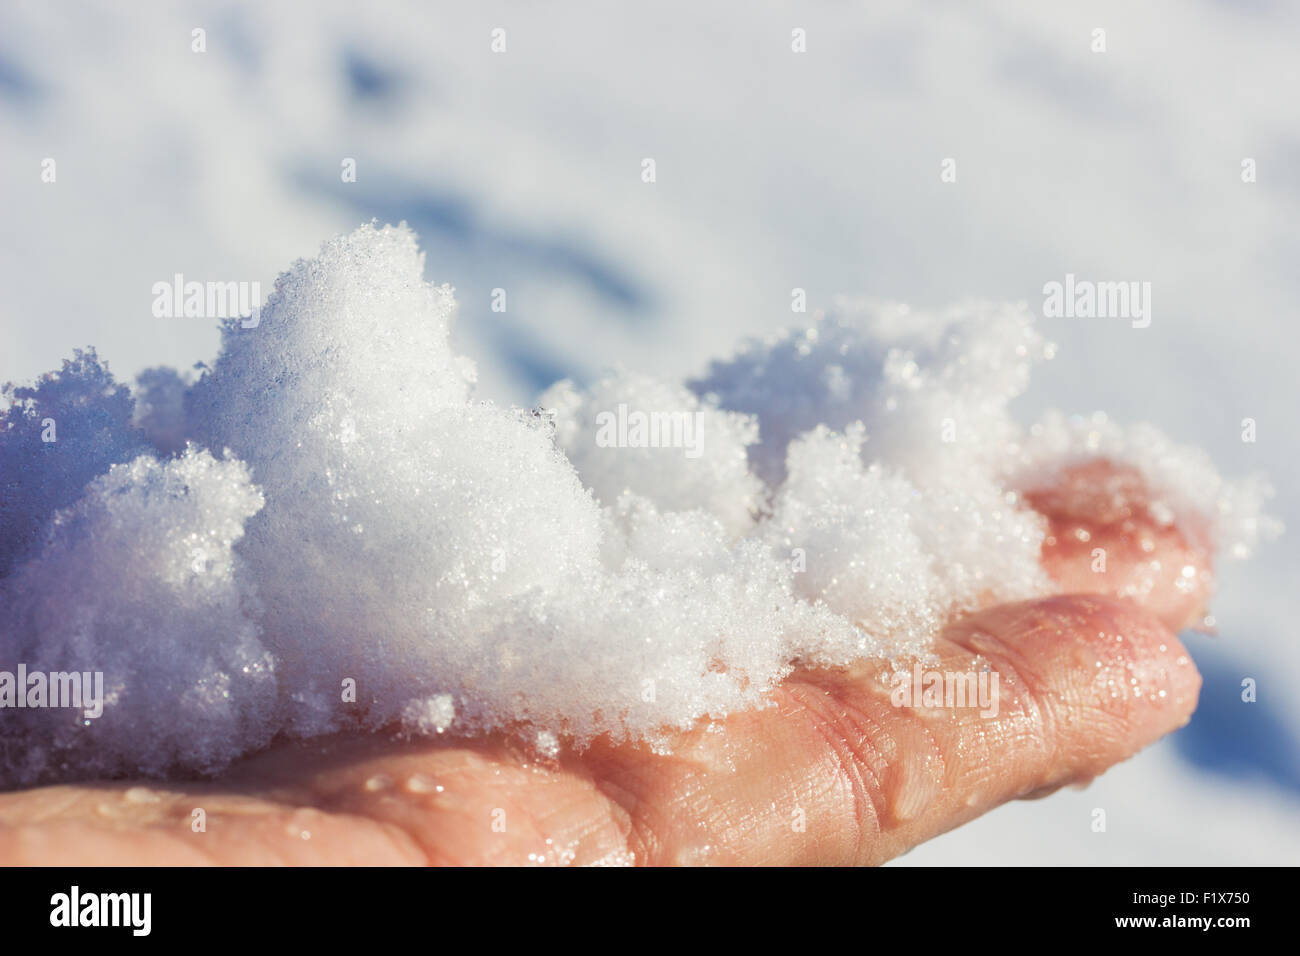 sparkling snow on the palm. Stock Photo